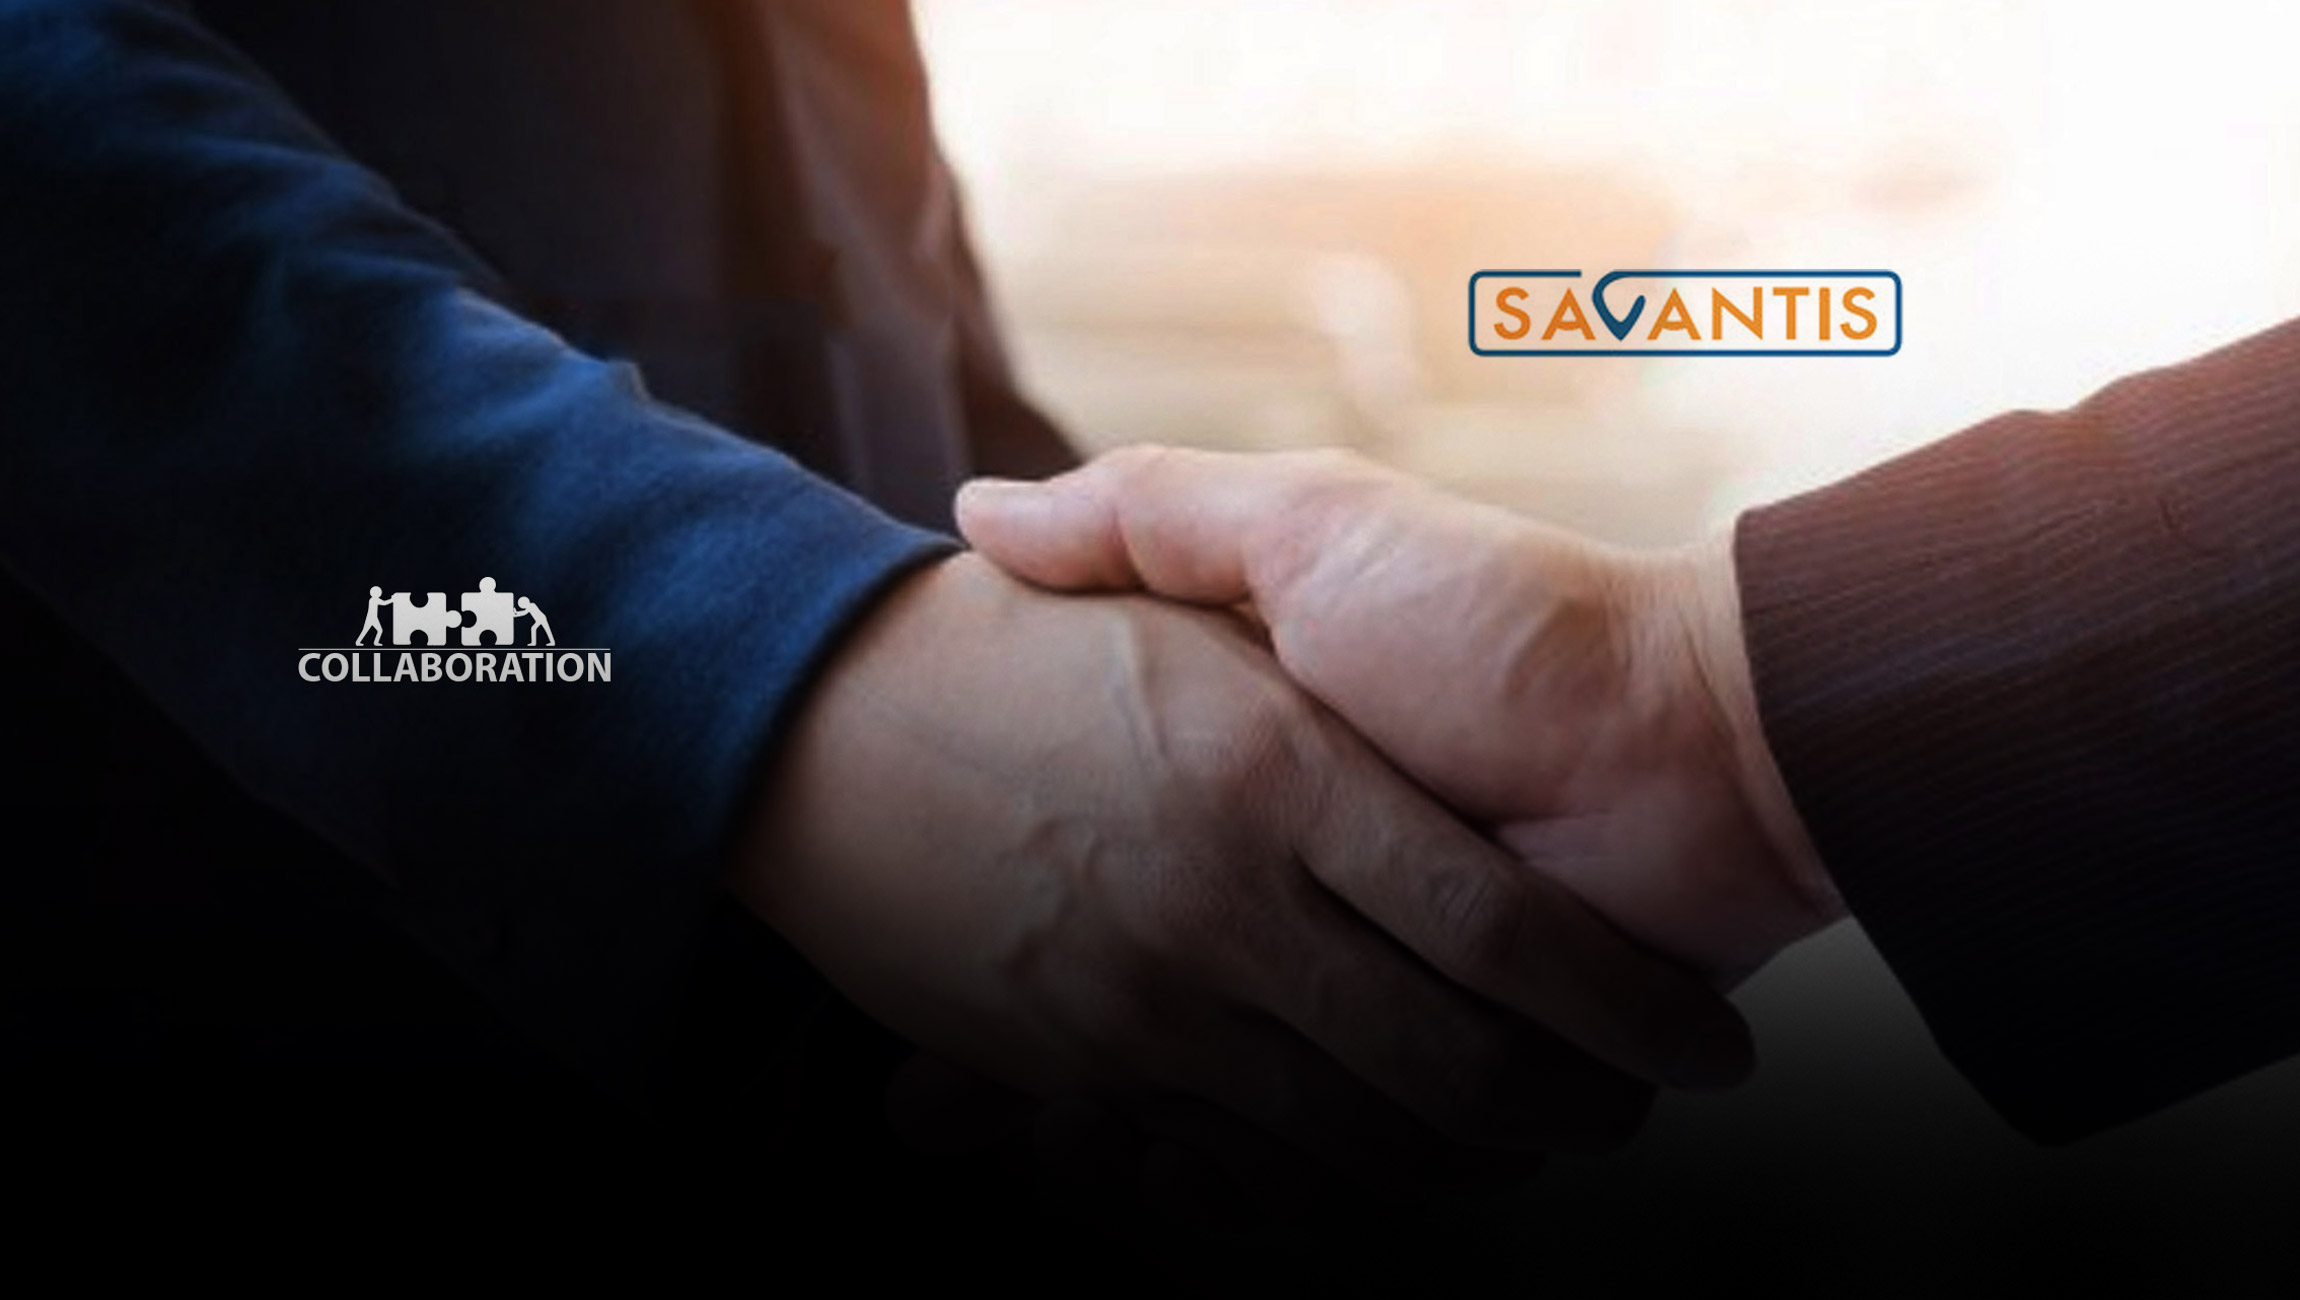 SAP Gold Partner Savantis Appoints Keith Hontz as Chief Executive Officer and President